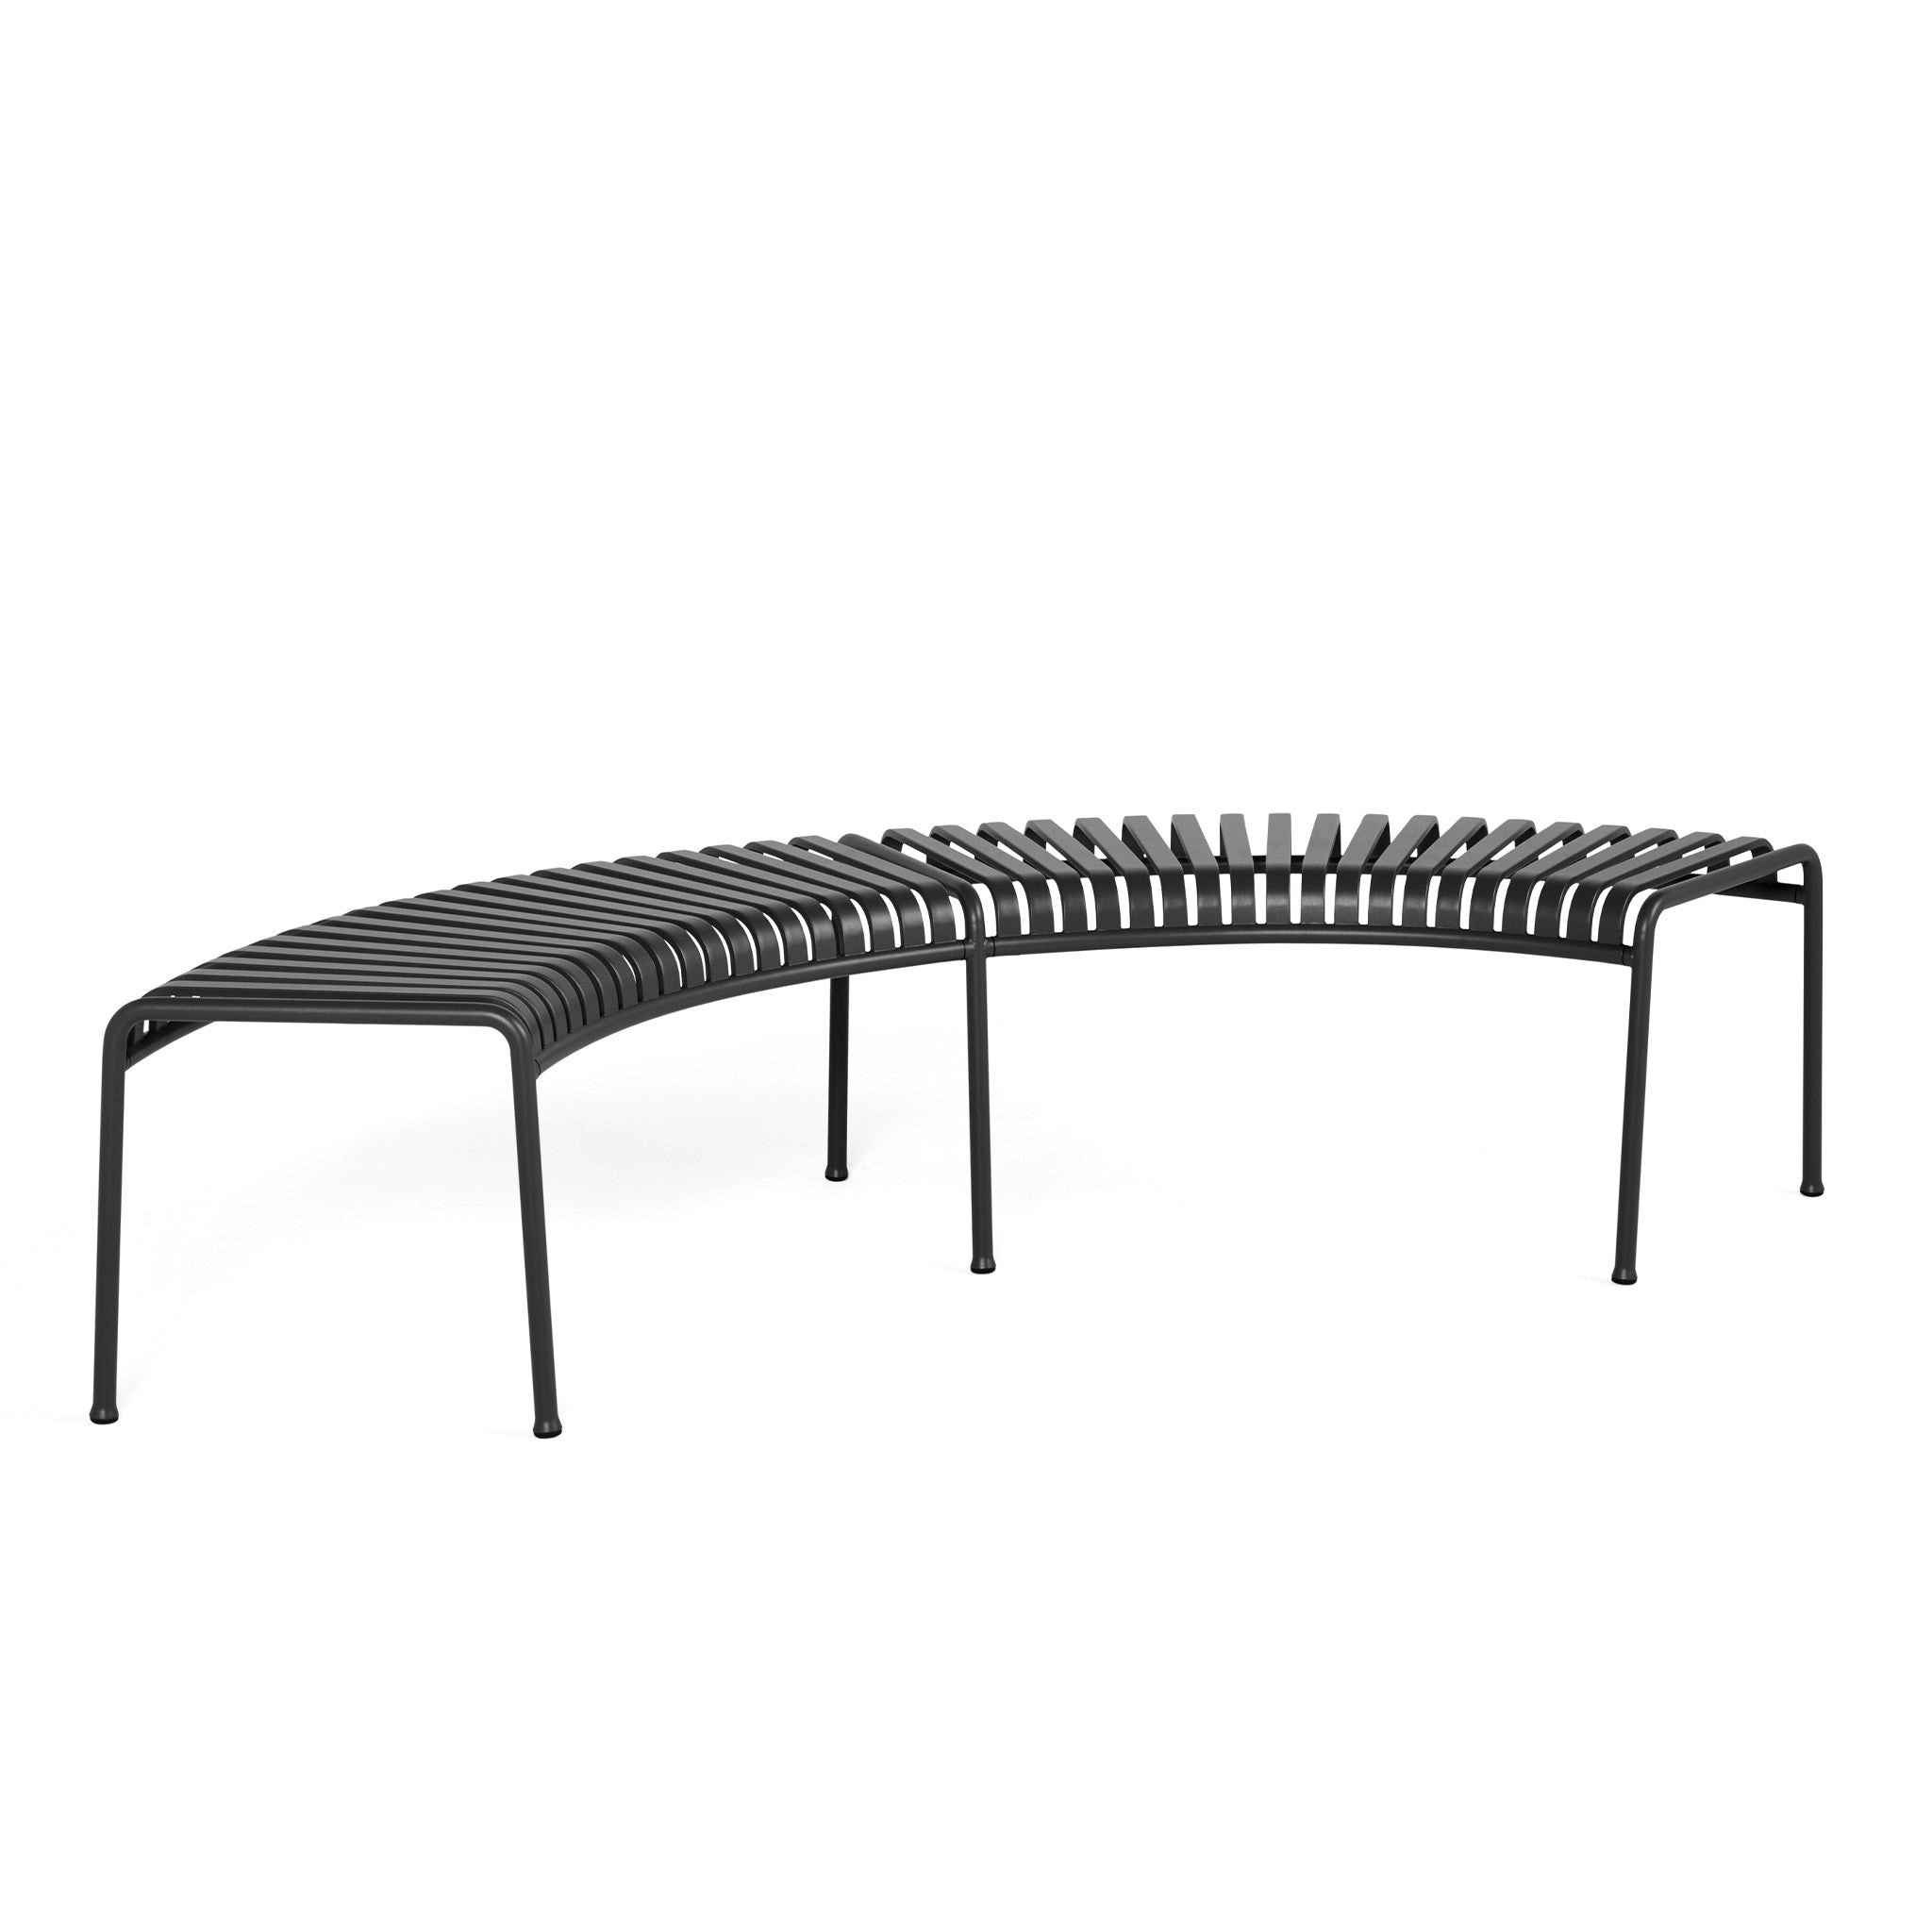 Palissade Park Bench by Ronan & Erwan Bouroullec for Hay